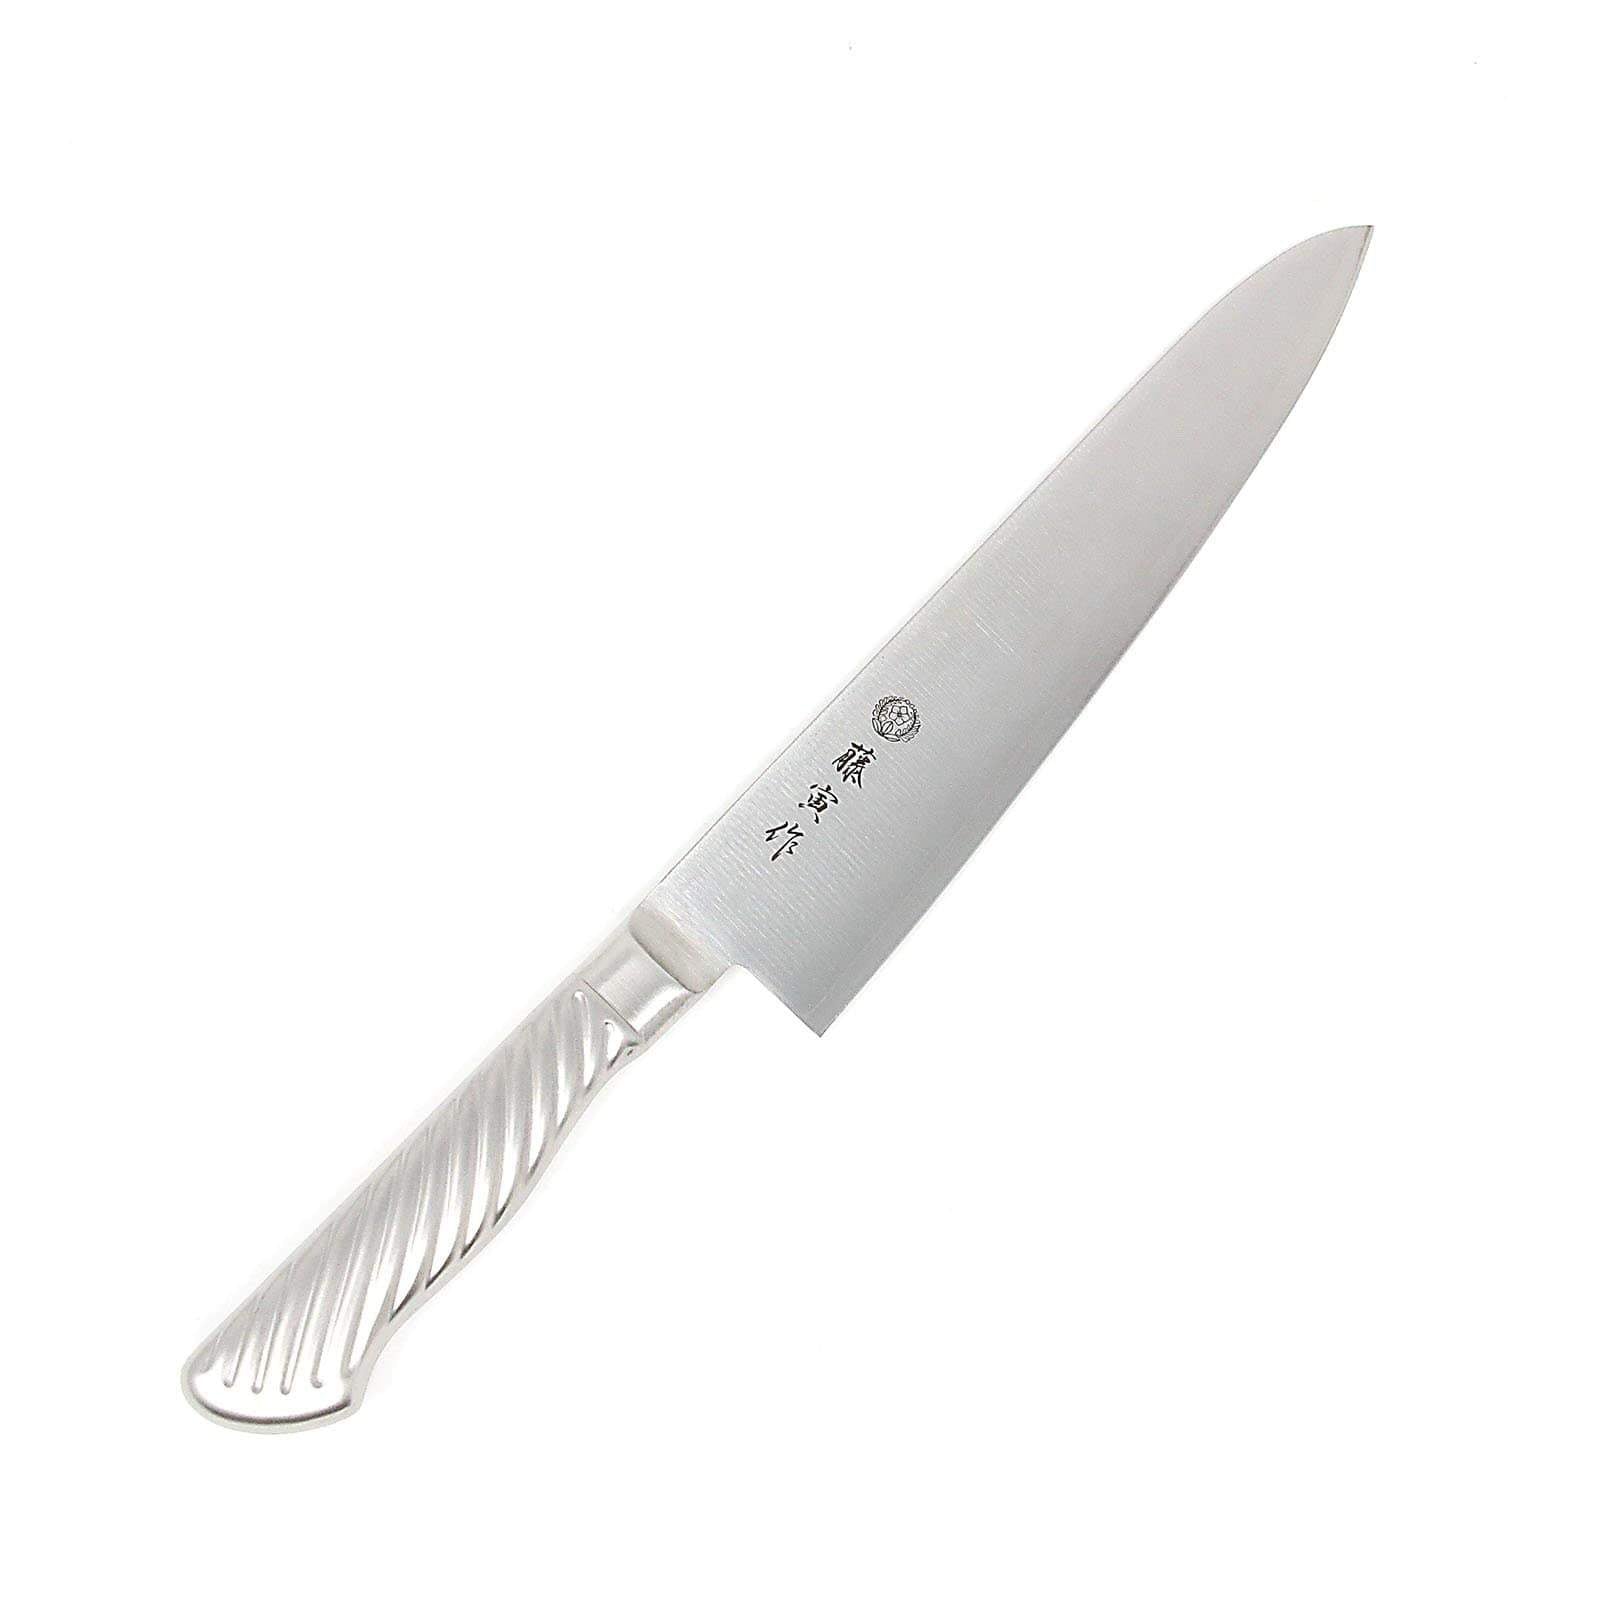 https://cdn.shopify.com/s/files/1/1610/3863/products/tojiro-fujitora-dp-3-layer-gyuto-knife-with-stainless-steel-handle-gyuto-knives-4491969167443_1600x.jpg?v=1563996122